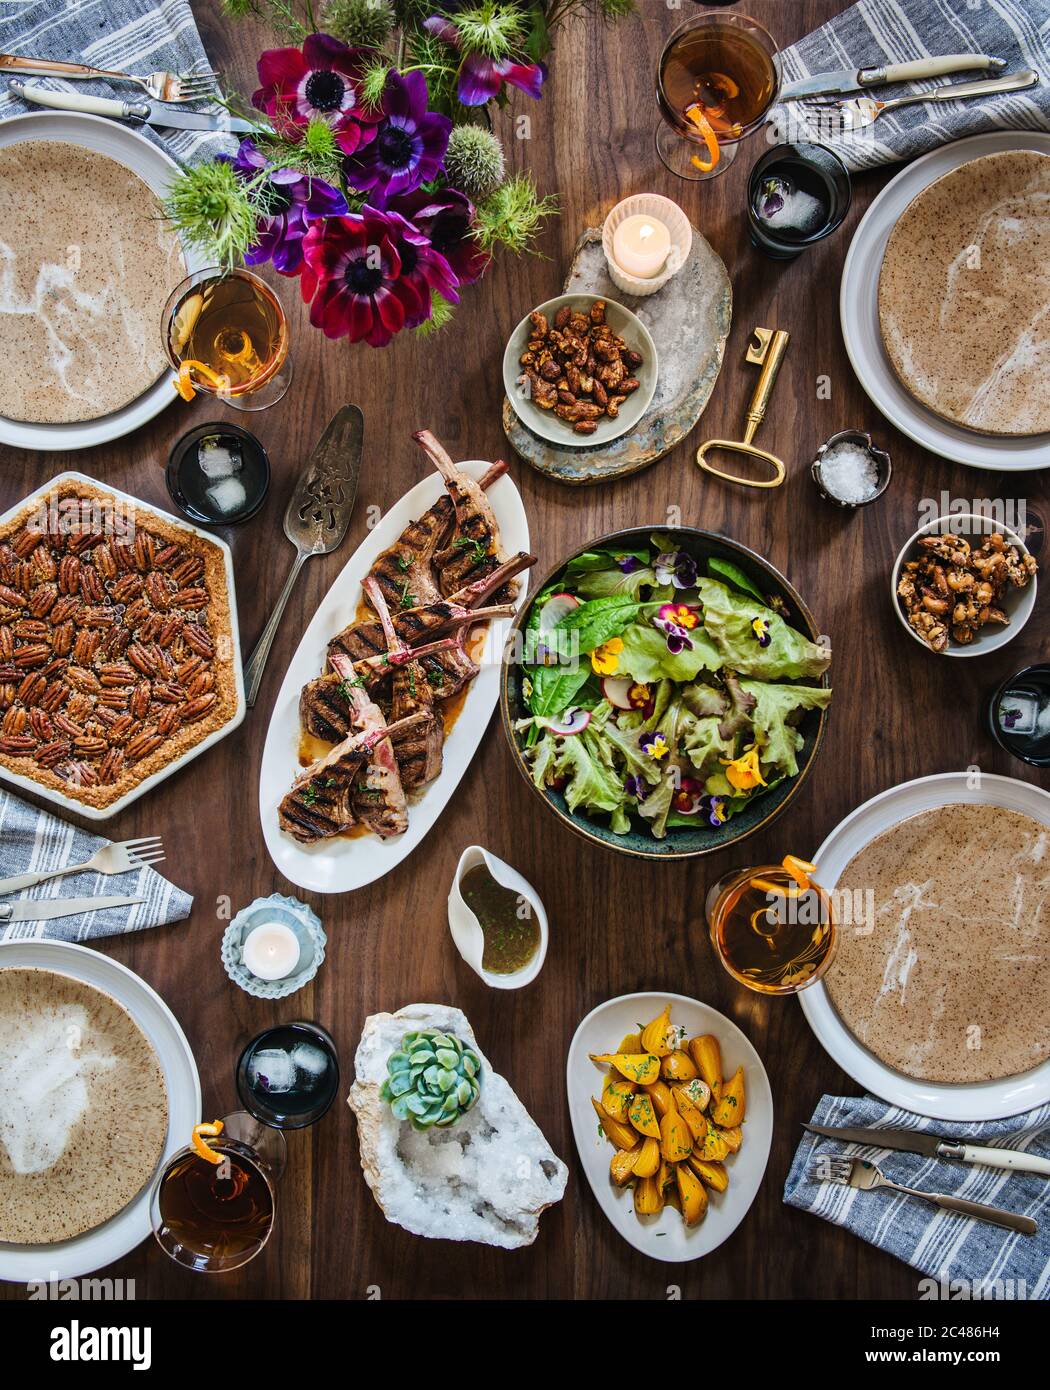 Tablescape with lamb, spring salad, golden beets, mixed drinks, and pecan pie Stock Photo